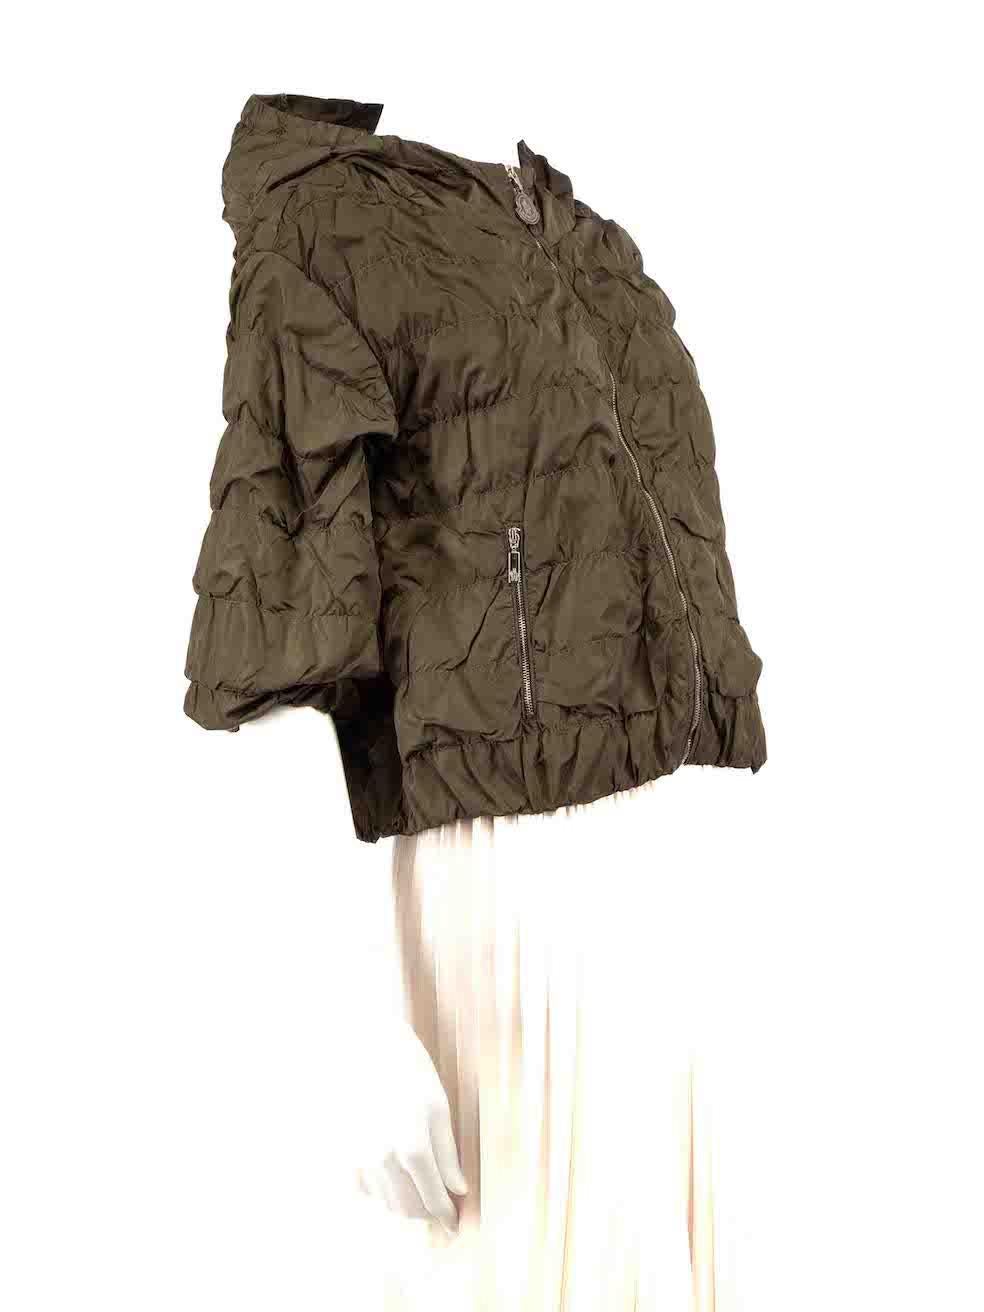 CONDITION is Very good. Minimal wear to jacket is evident. One small mark to the front right pocket area on this used Moncler designer resale item.
 
 
 
 Details
 
 
 Salome model
 
 Khaki
 
 Synthetic
 
 Windbreaker jacket
 
 Ruched accent
 
